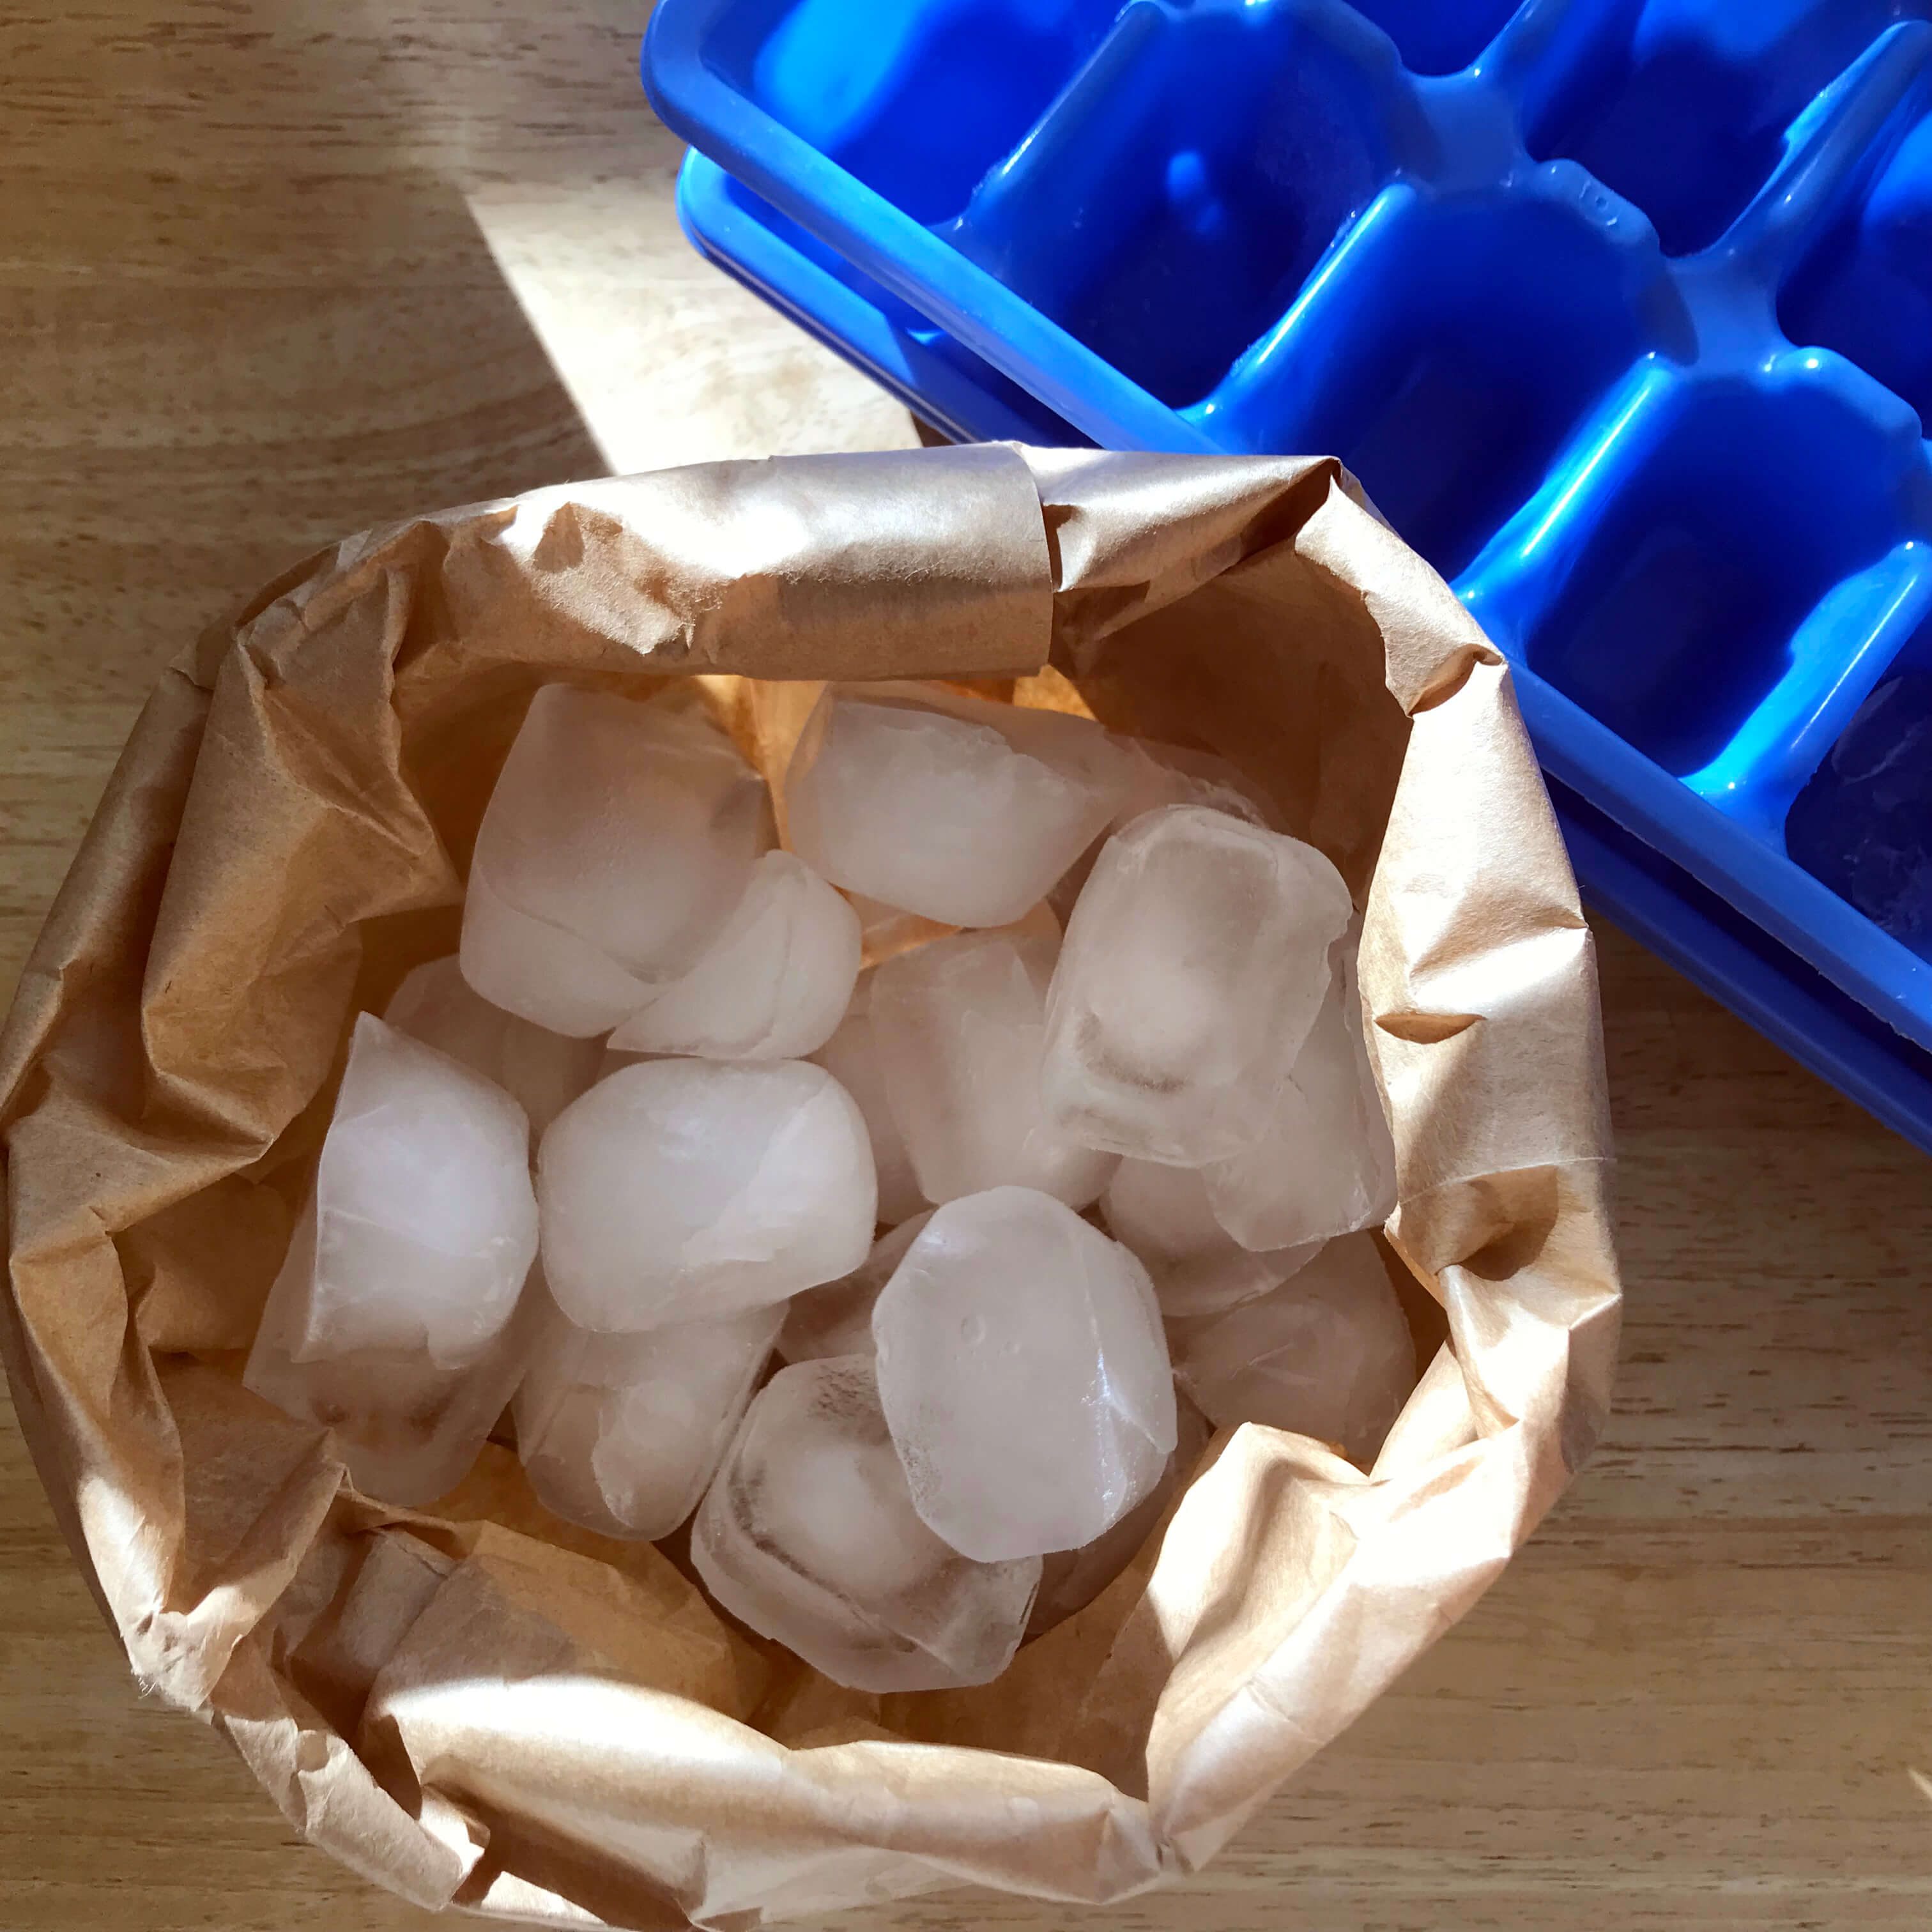 If you put something inside the ice box surrounded by ice in the